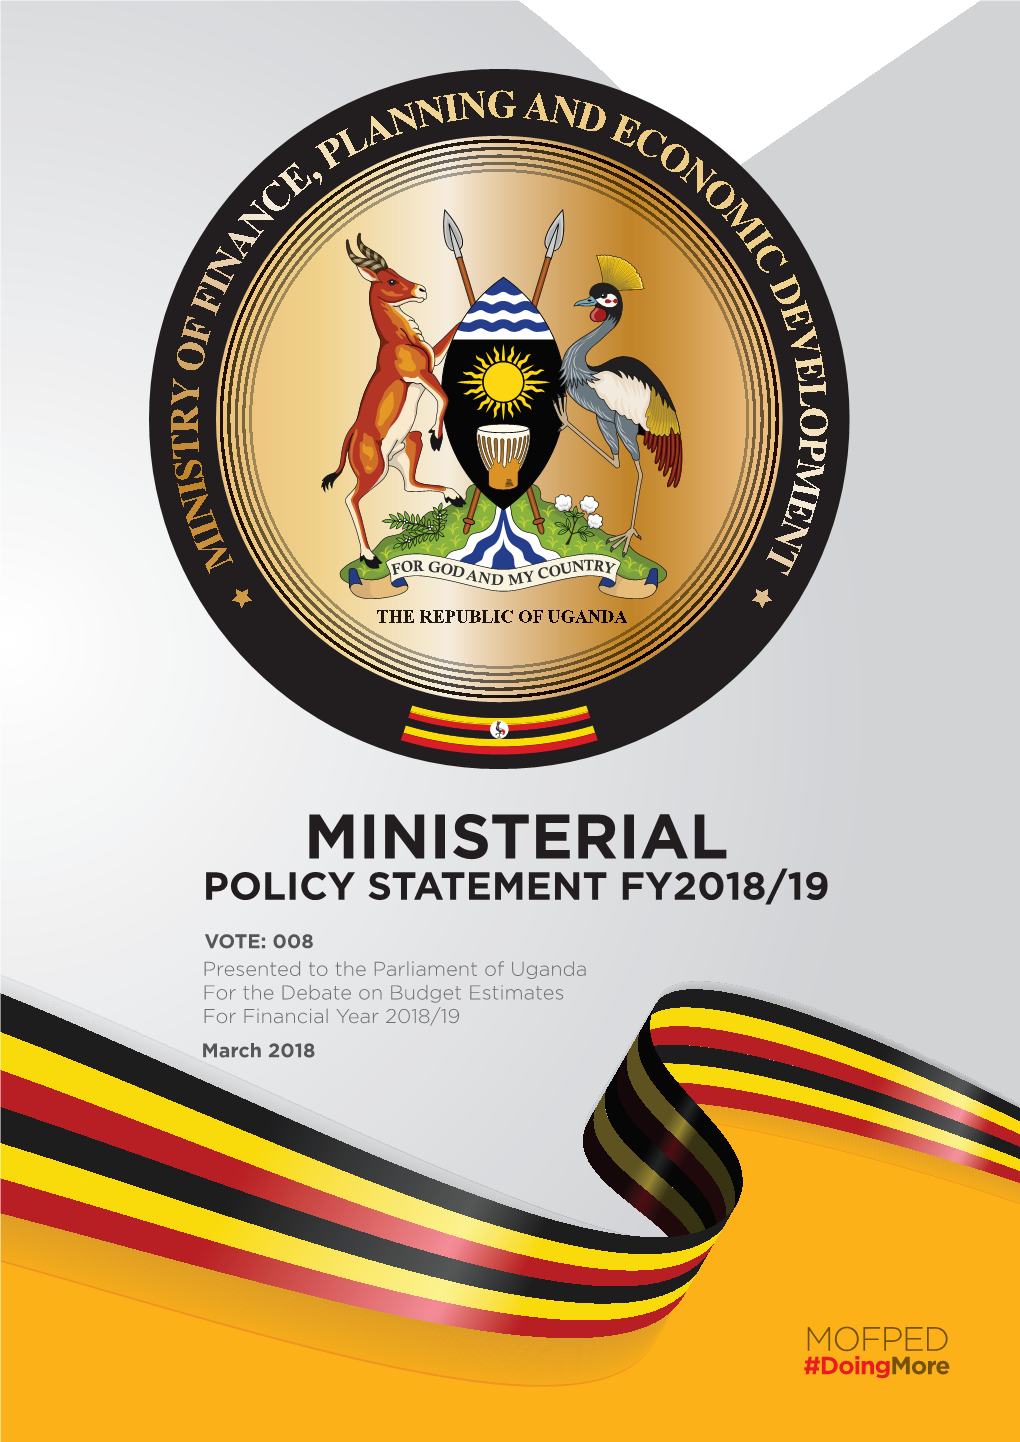 Ministerial Policy Statement Fy2018/19